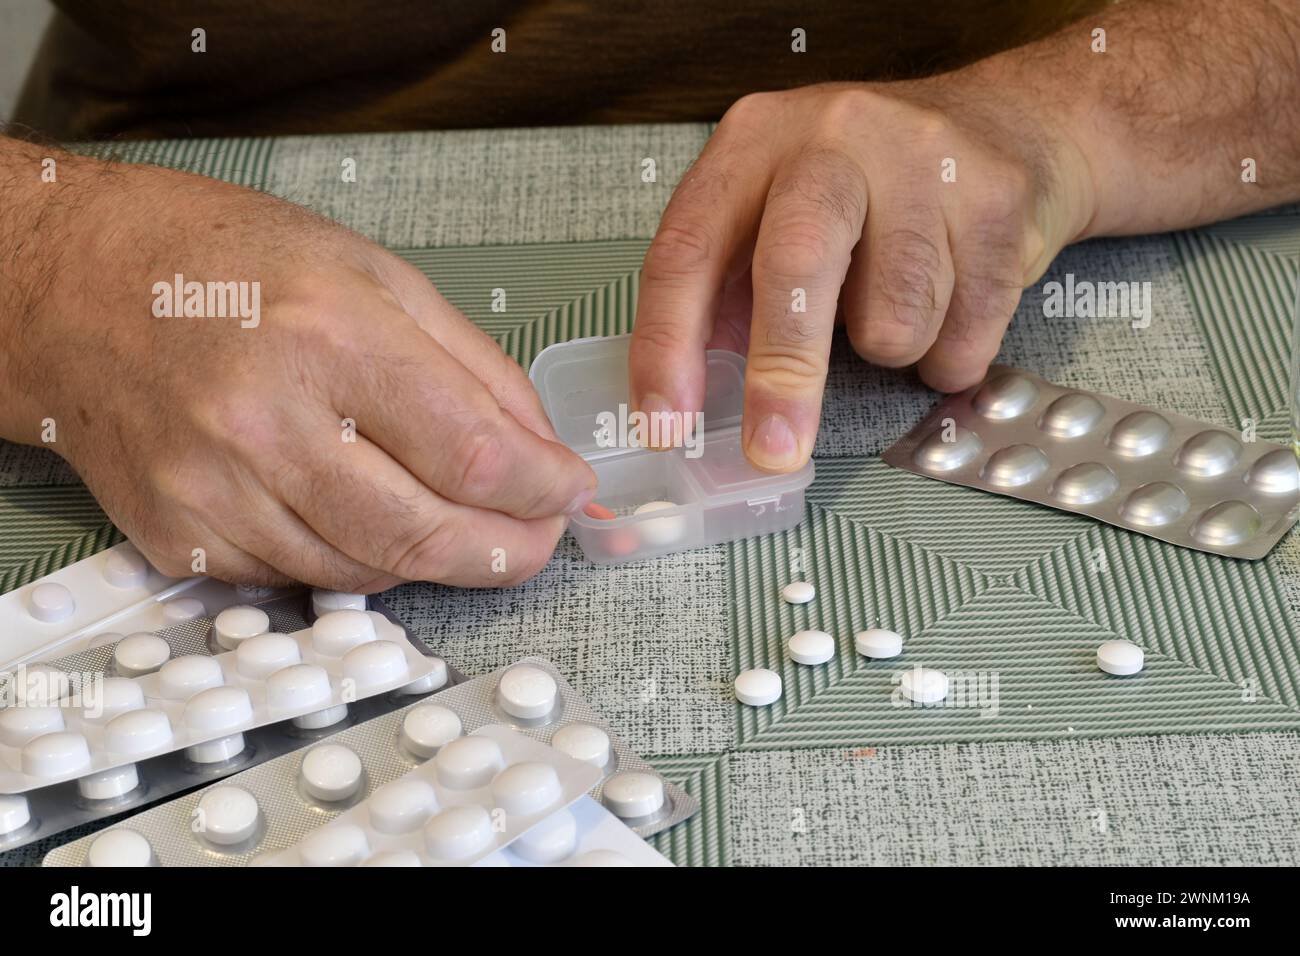 There are pills on the table. Man's hands puts pills in a box. Stock Photo